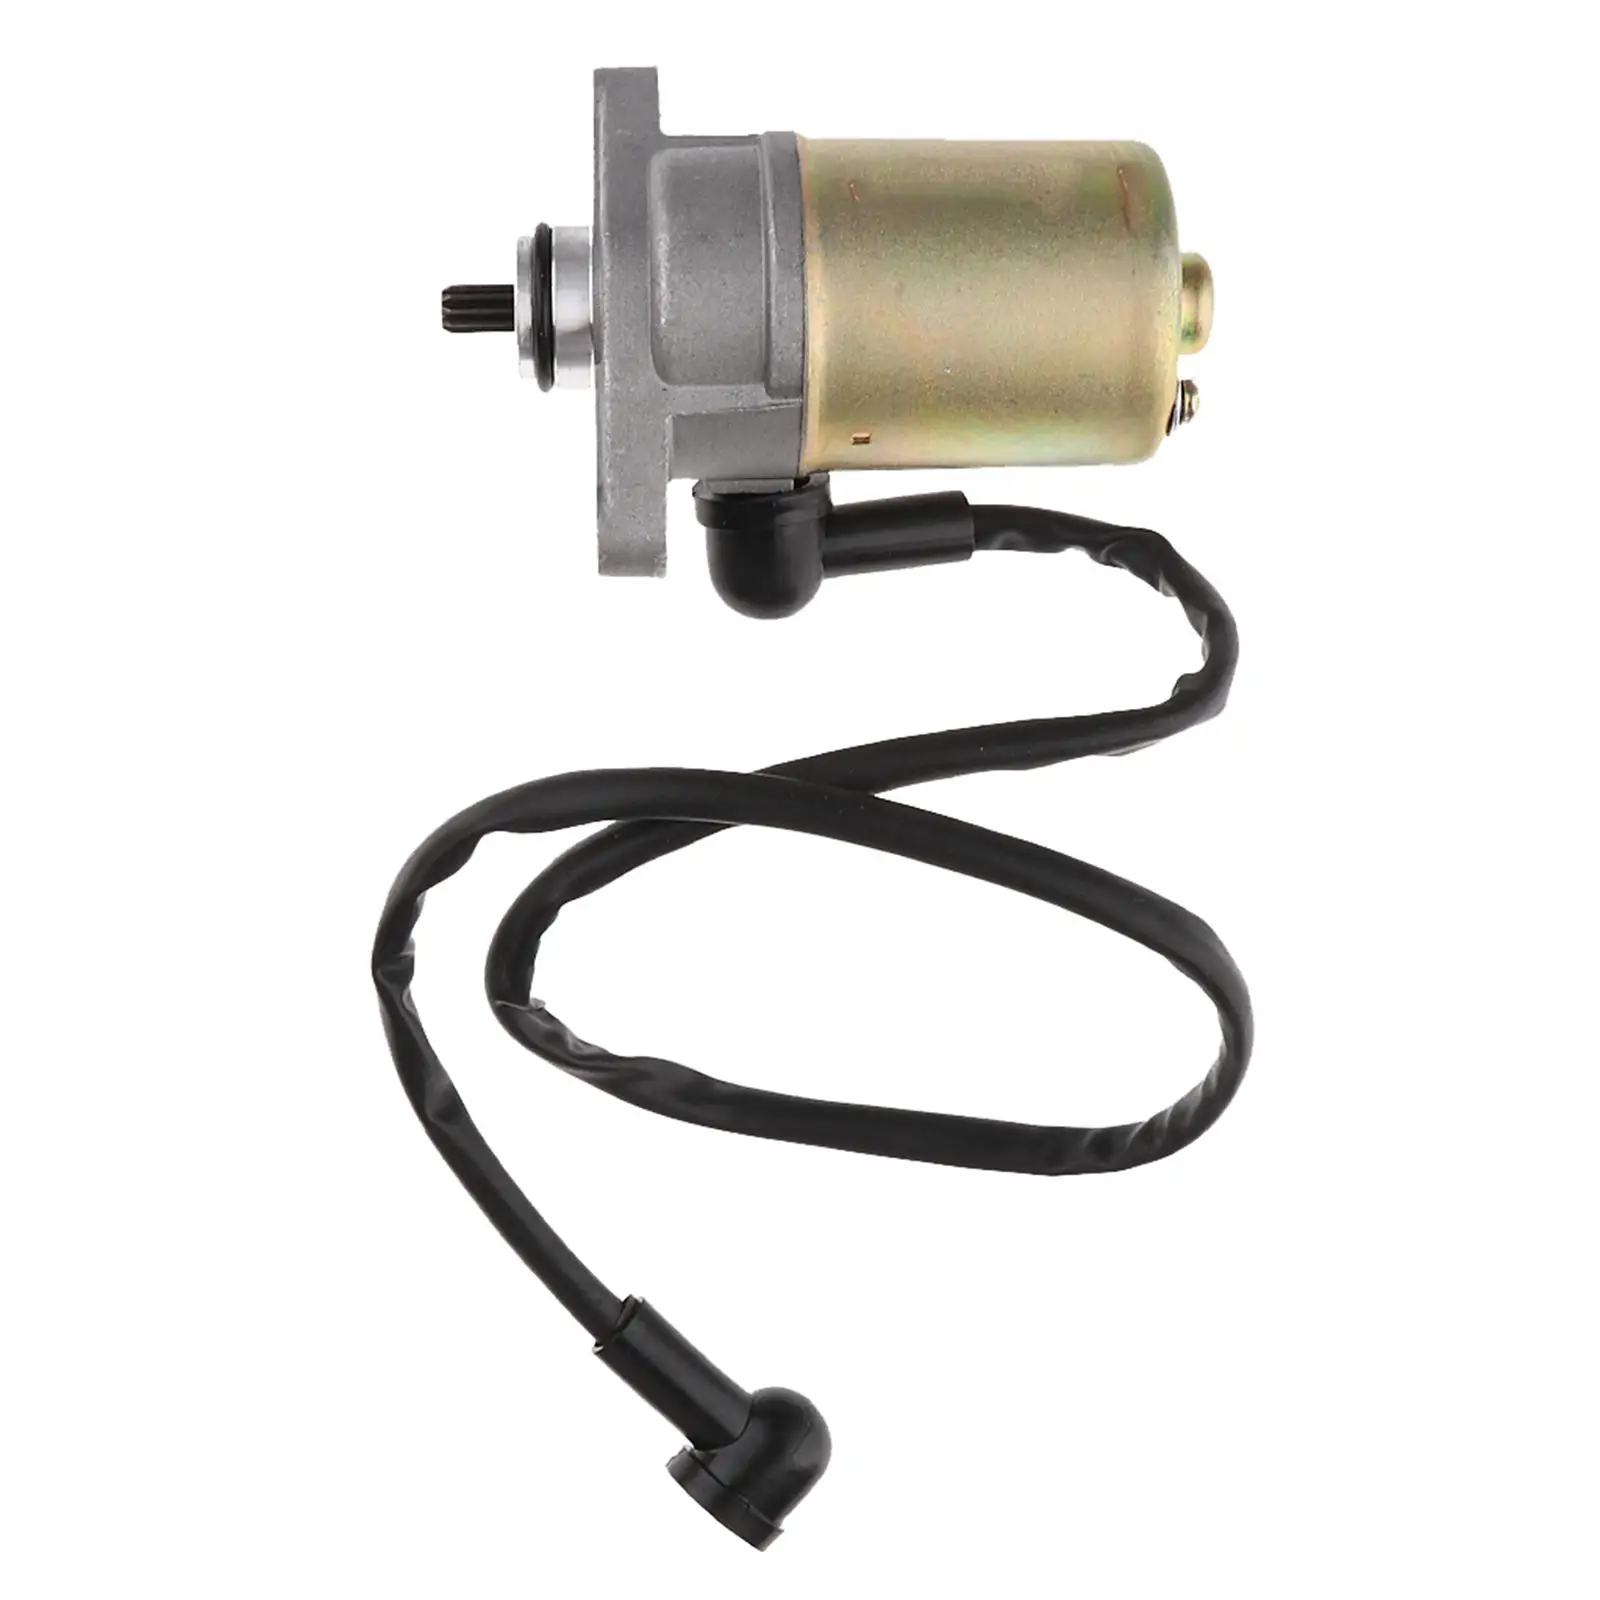 Motorcycle ATVs Go Carts Starter Motor for 10 GY6 50CC 139QMB Engine